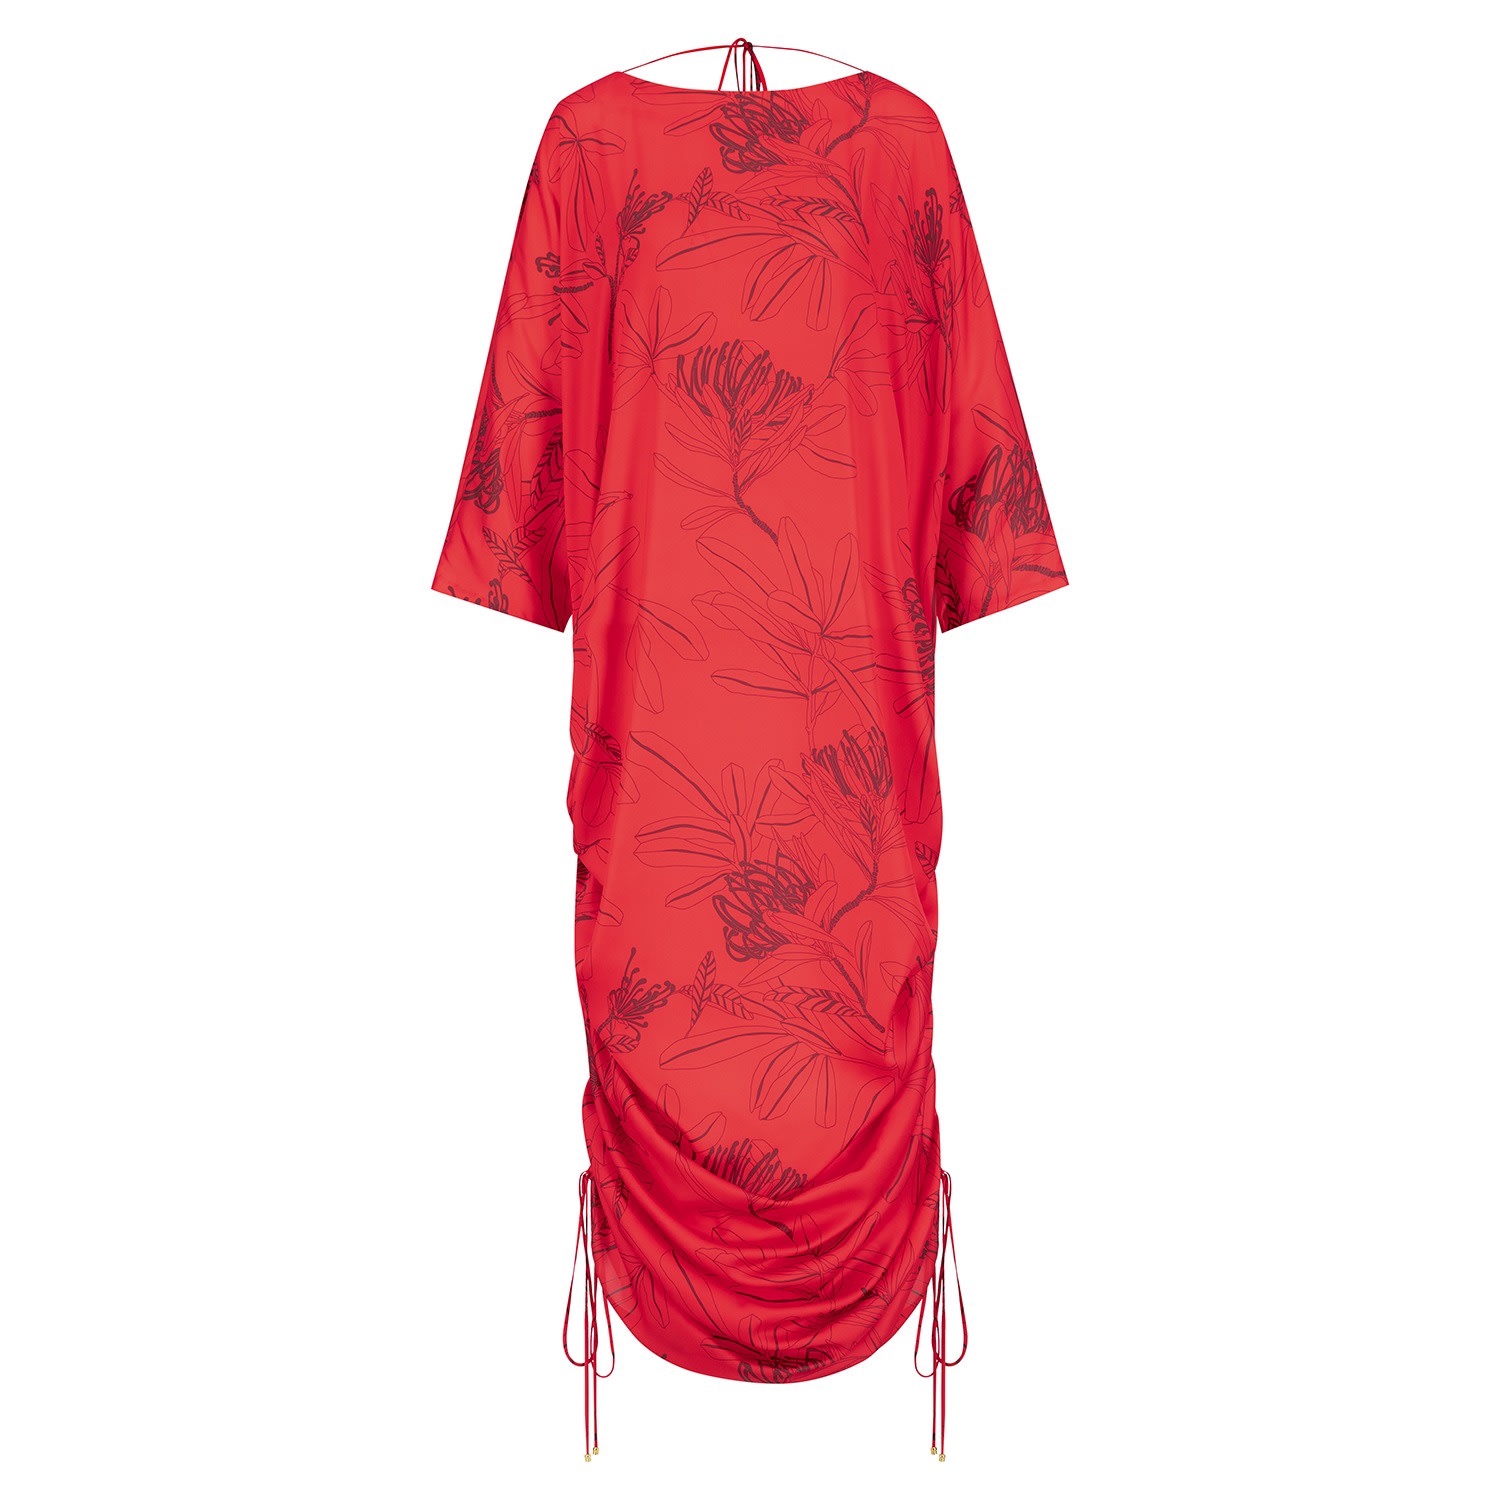 Women’s Pure Silk Kaftan With String Gathering On The Side Secured With Golden Metal Balls -Cherry Red Medium Azzalia